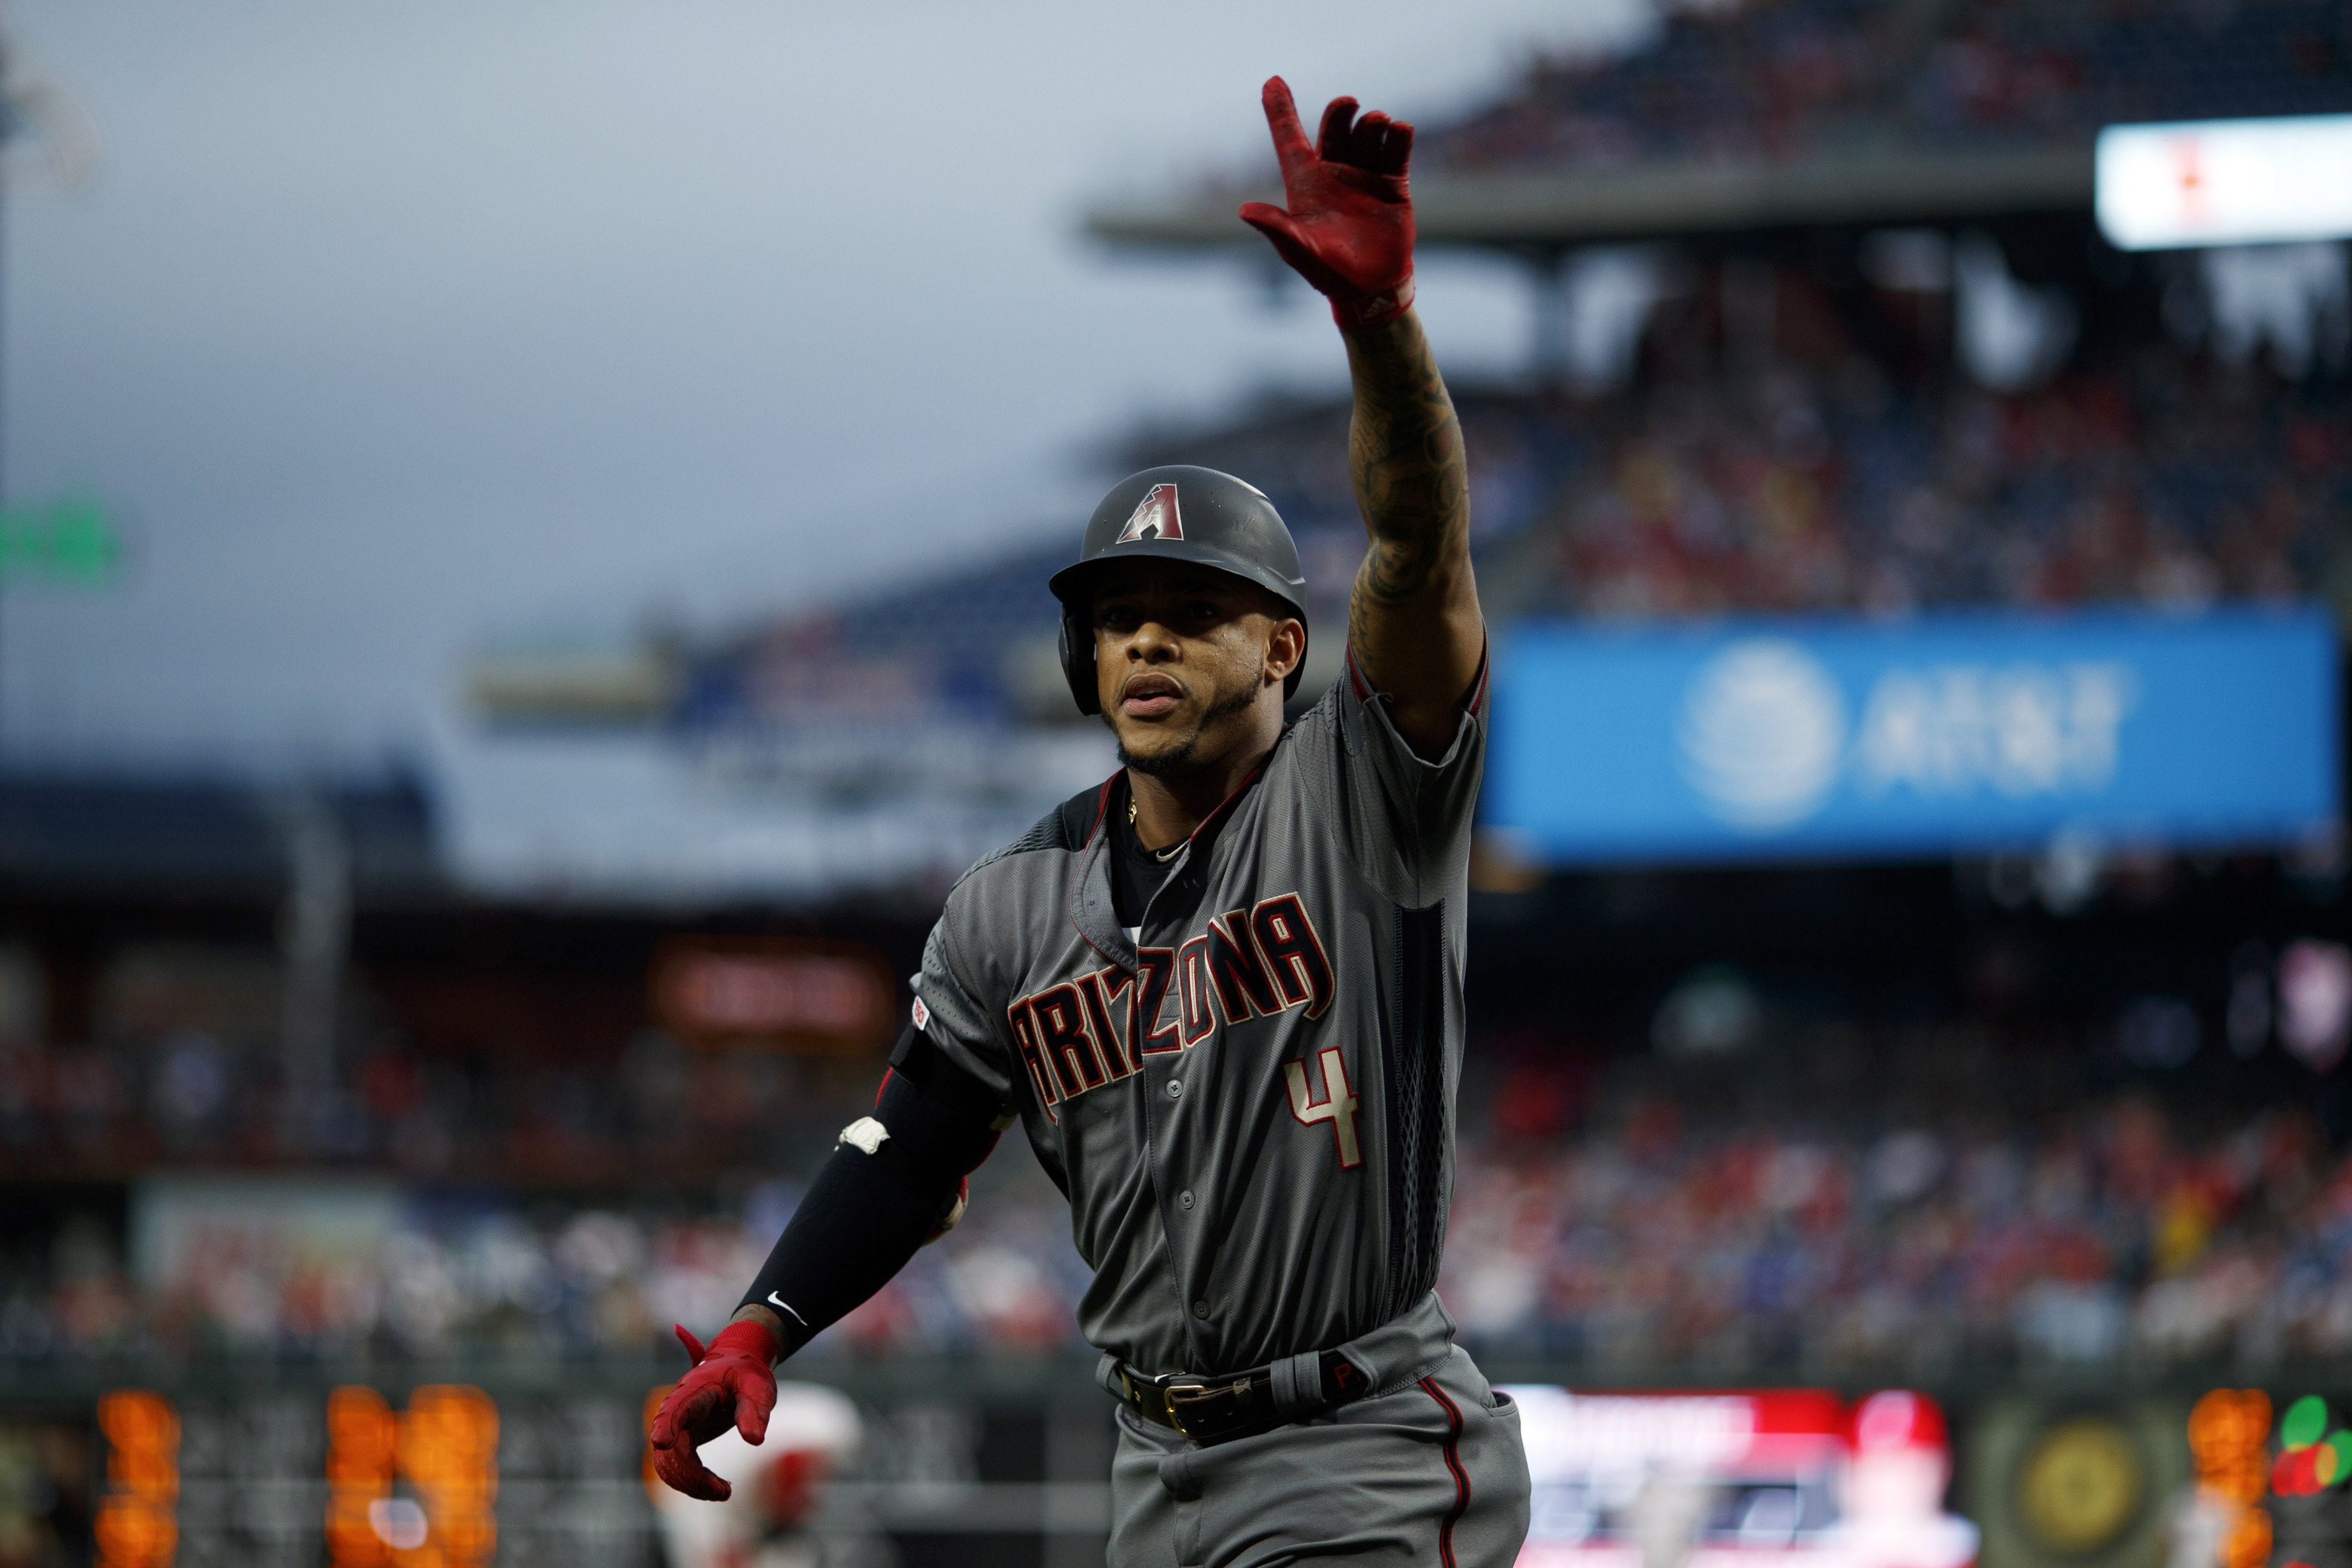 D'backs beat Phillies 13-8, teams combine for record 13 HRs